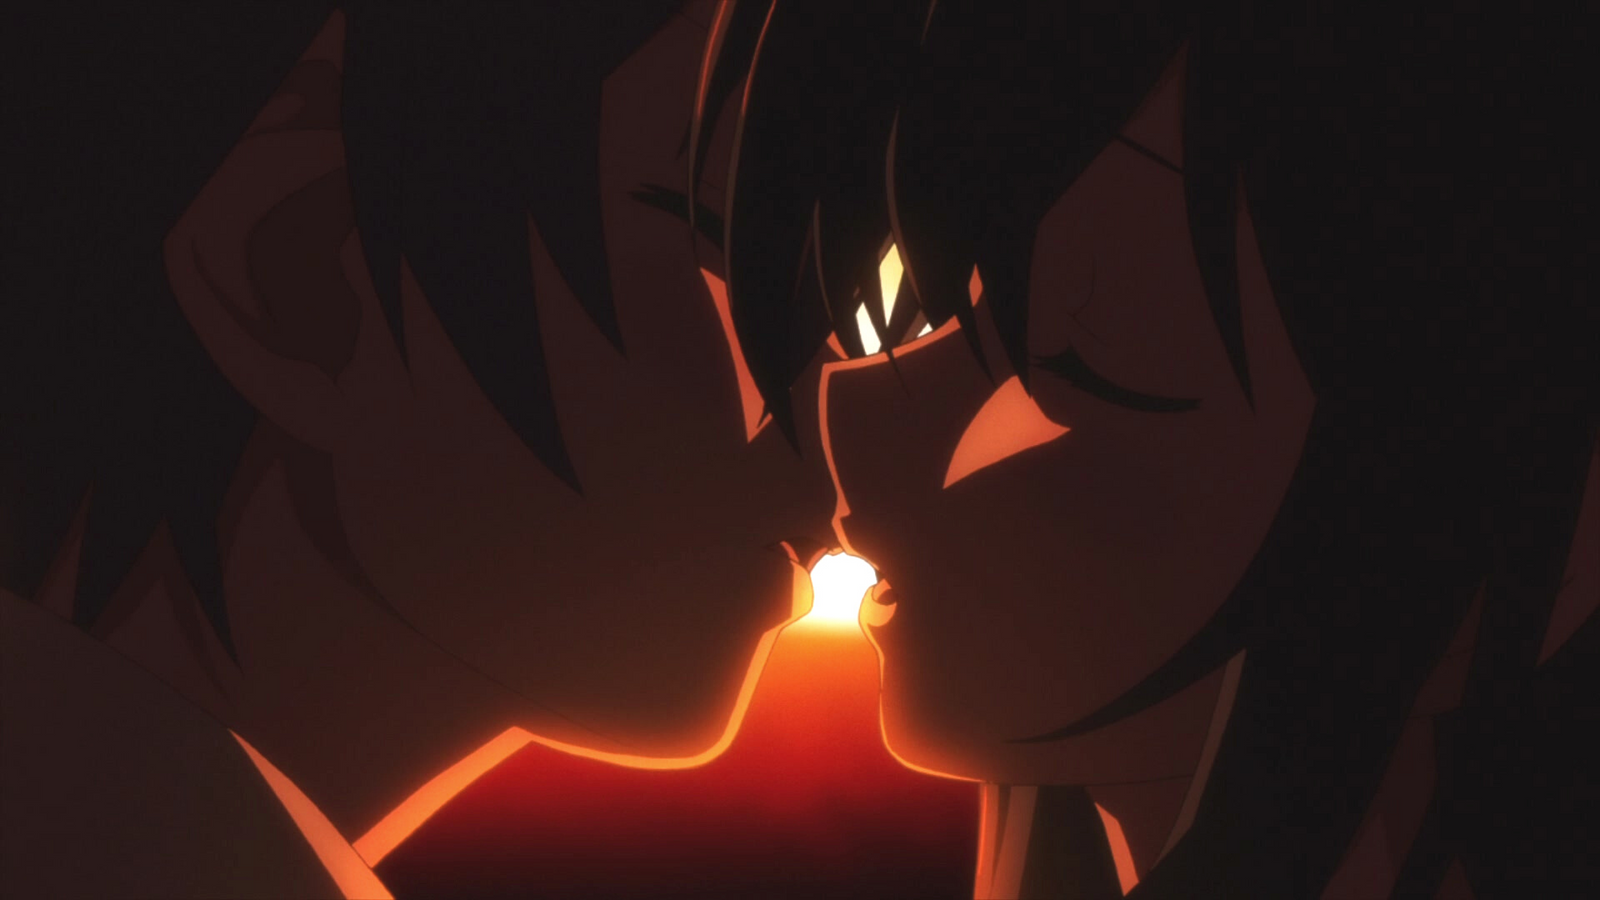 Do Tohka and Shido End Up Together in Date A Live?: Shido and Tohka leaning in for a kiss